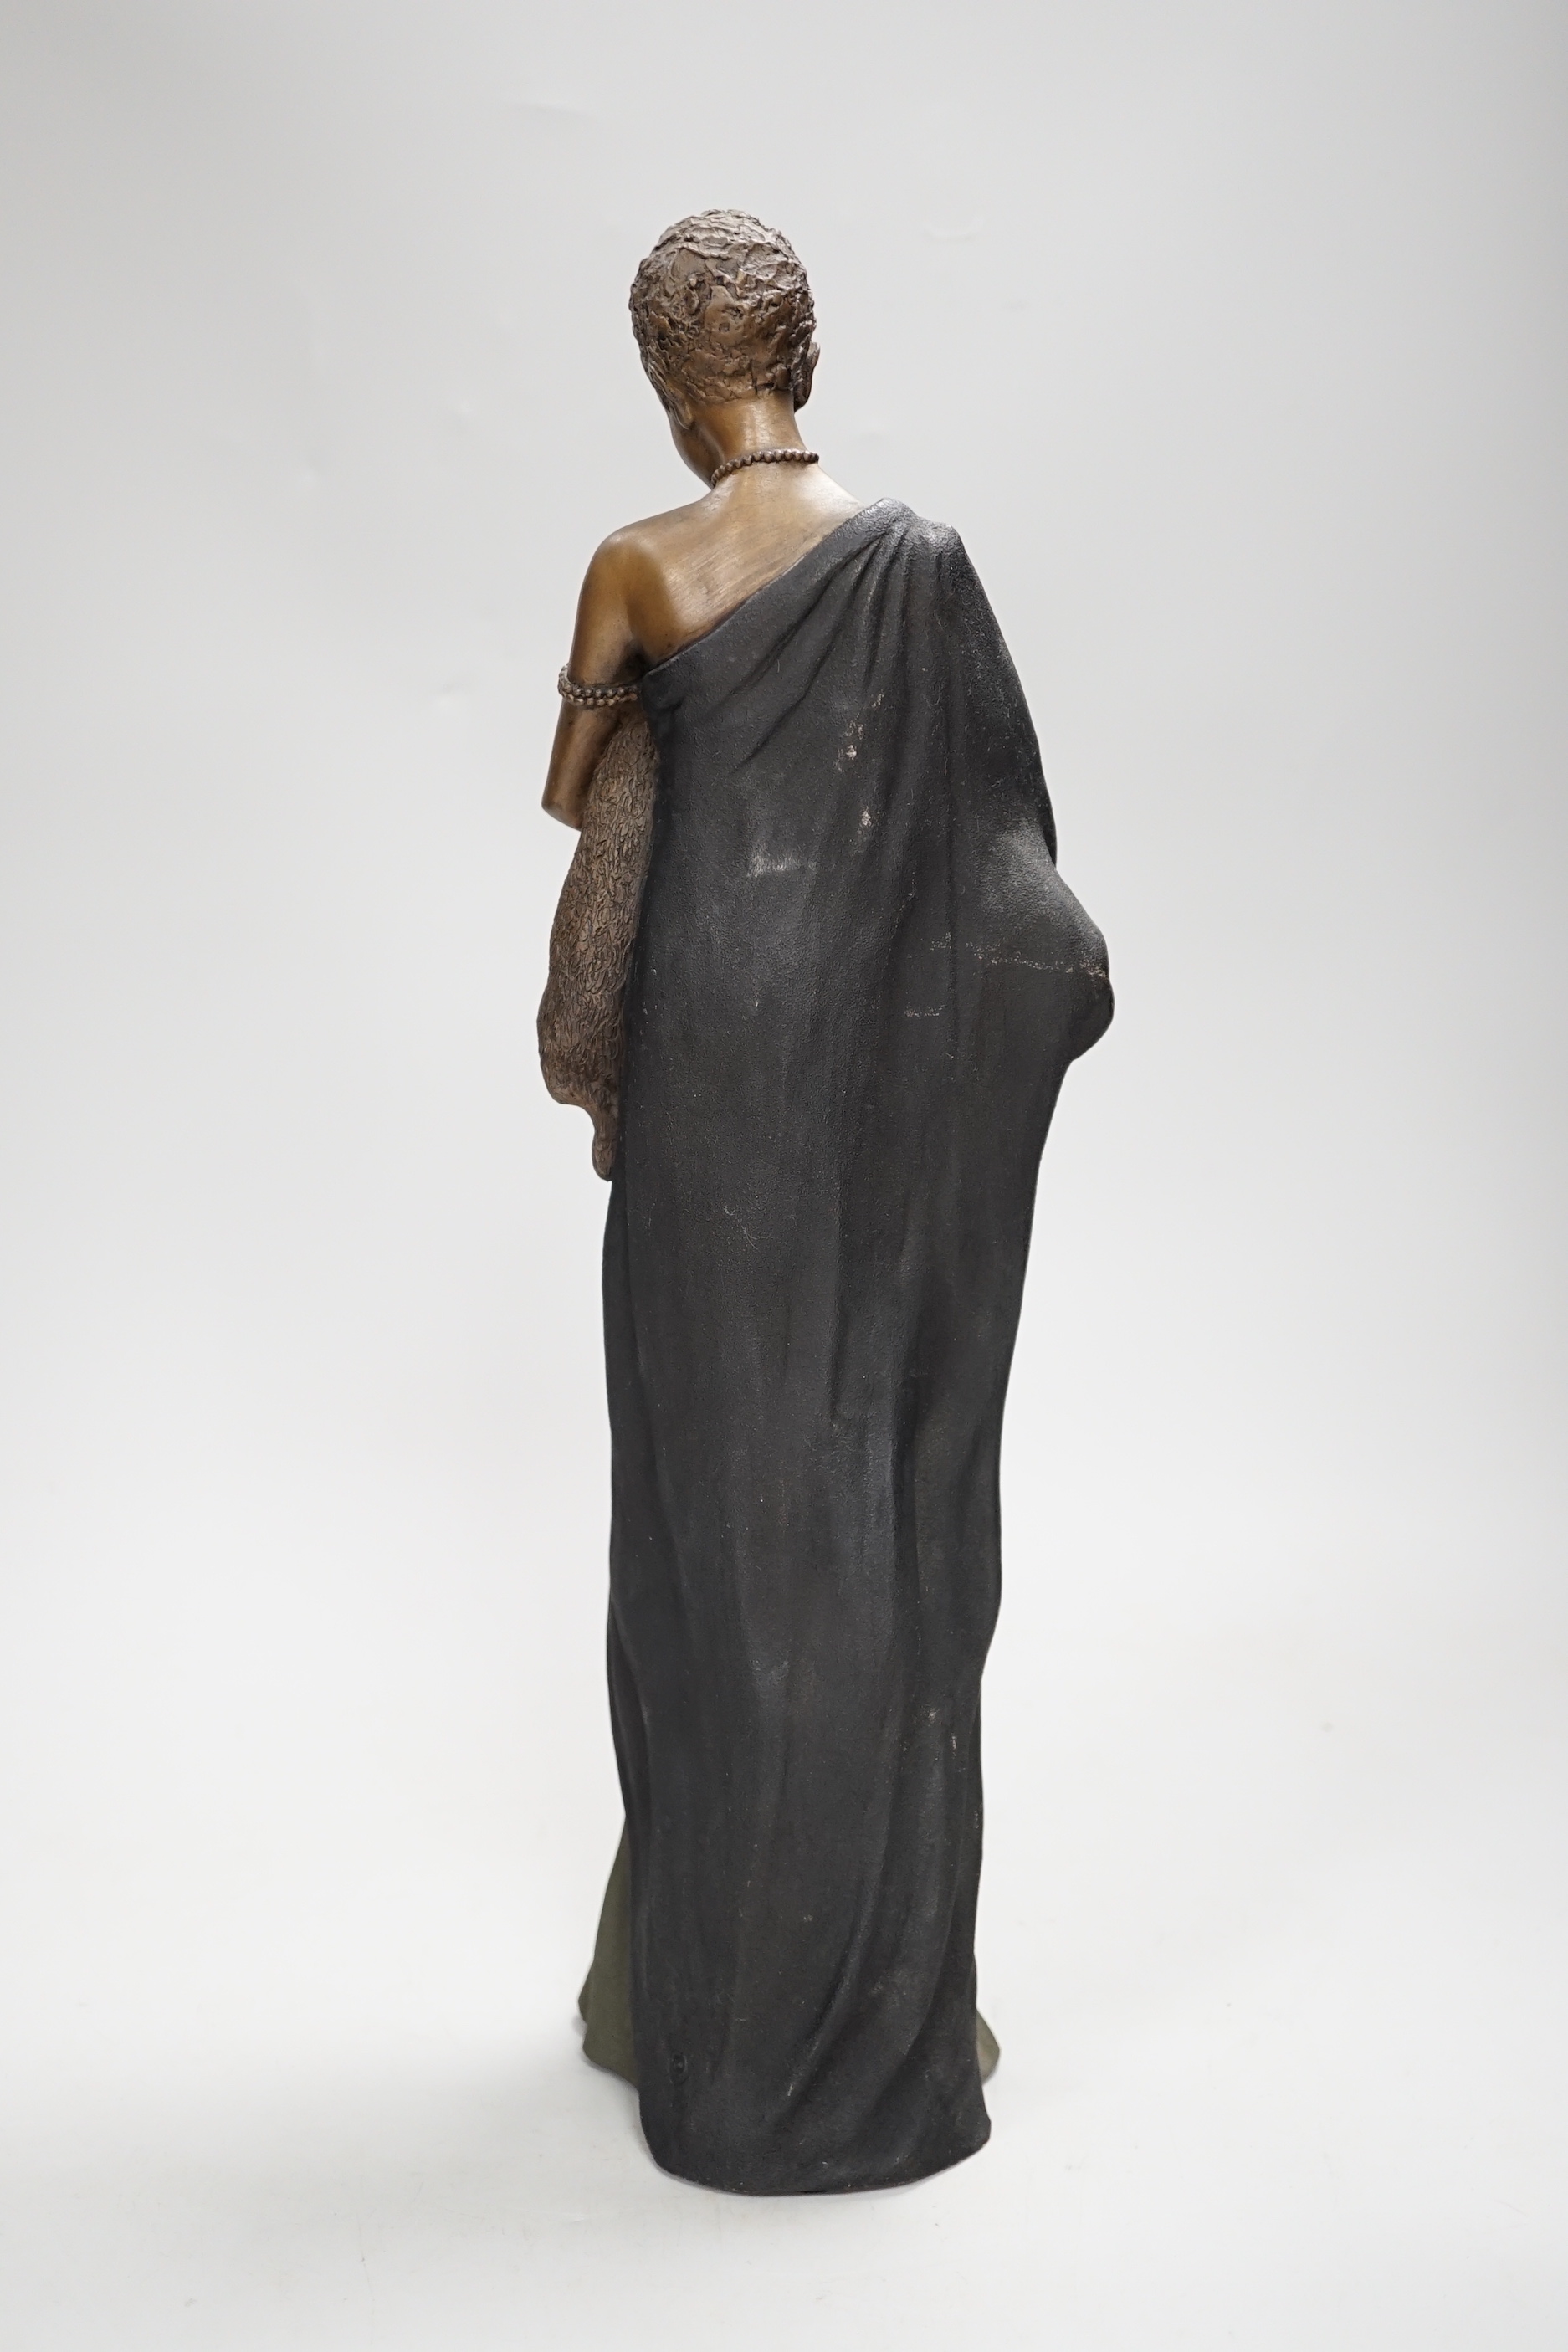 Stacy Baynes, limited edition bronzed resin Masai figure, 